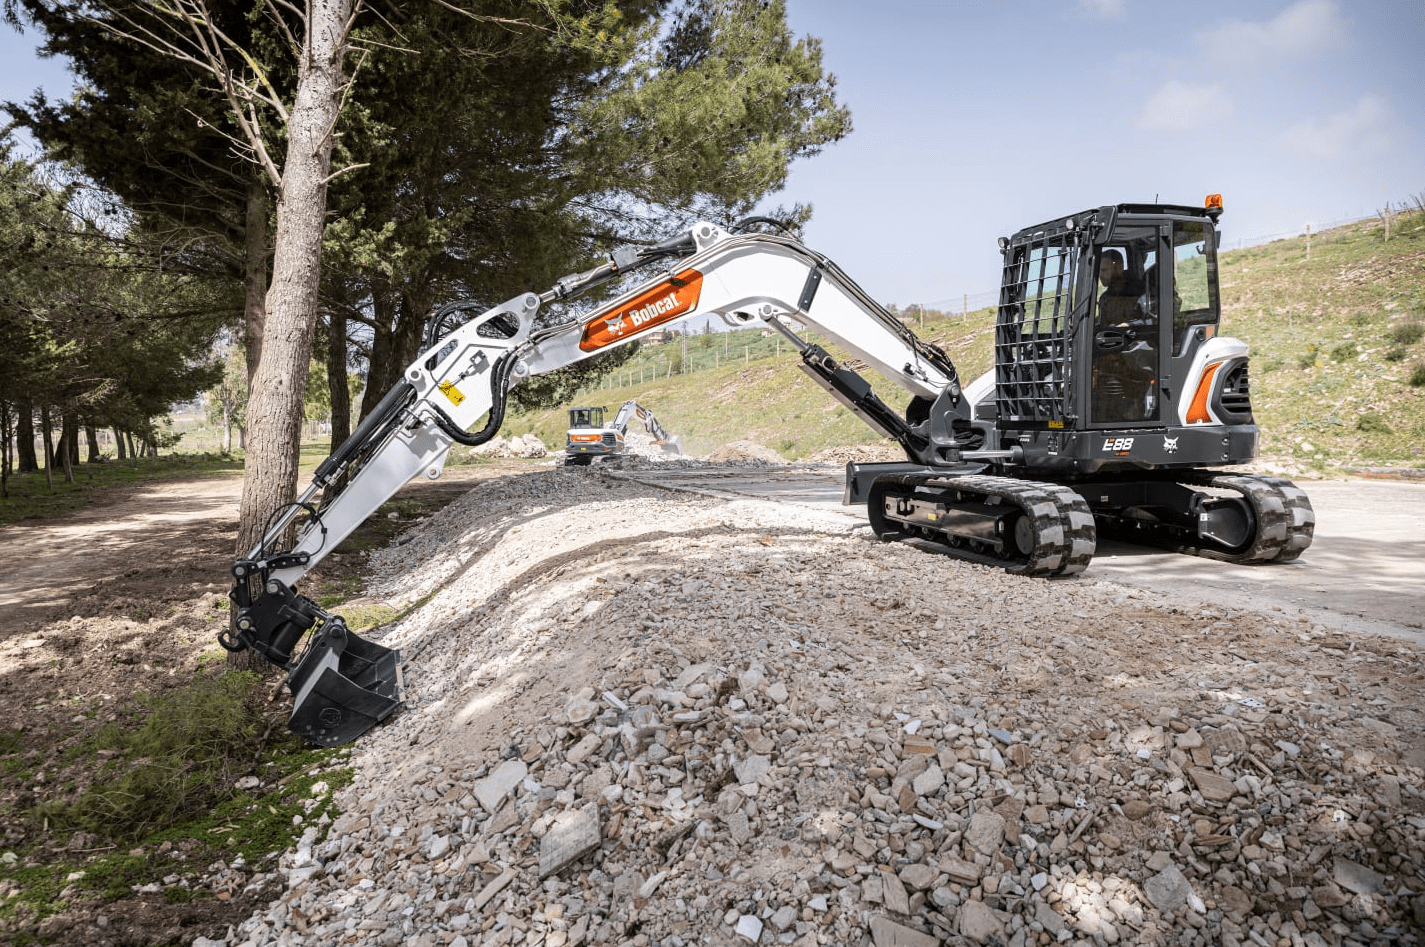 Browse Specs and more for the E88 Compact Excavator - Bobcat of Indy